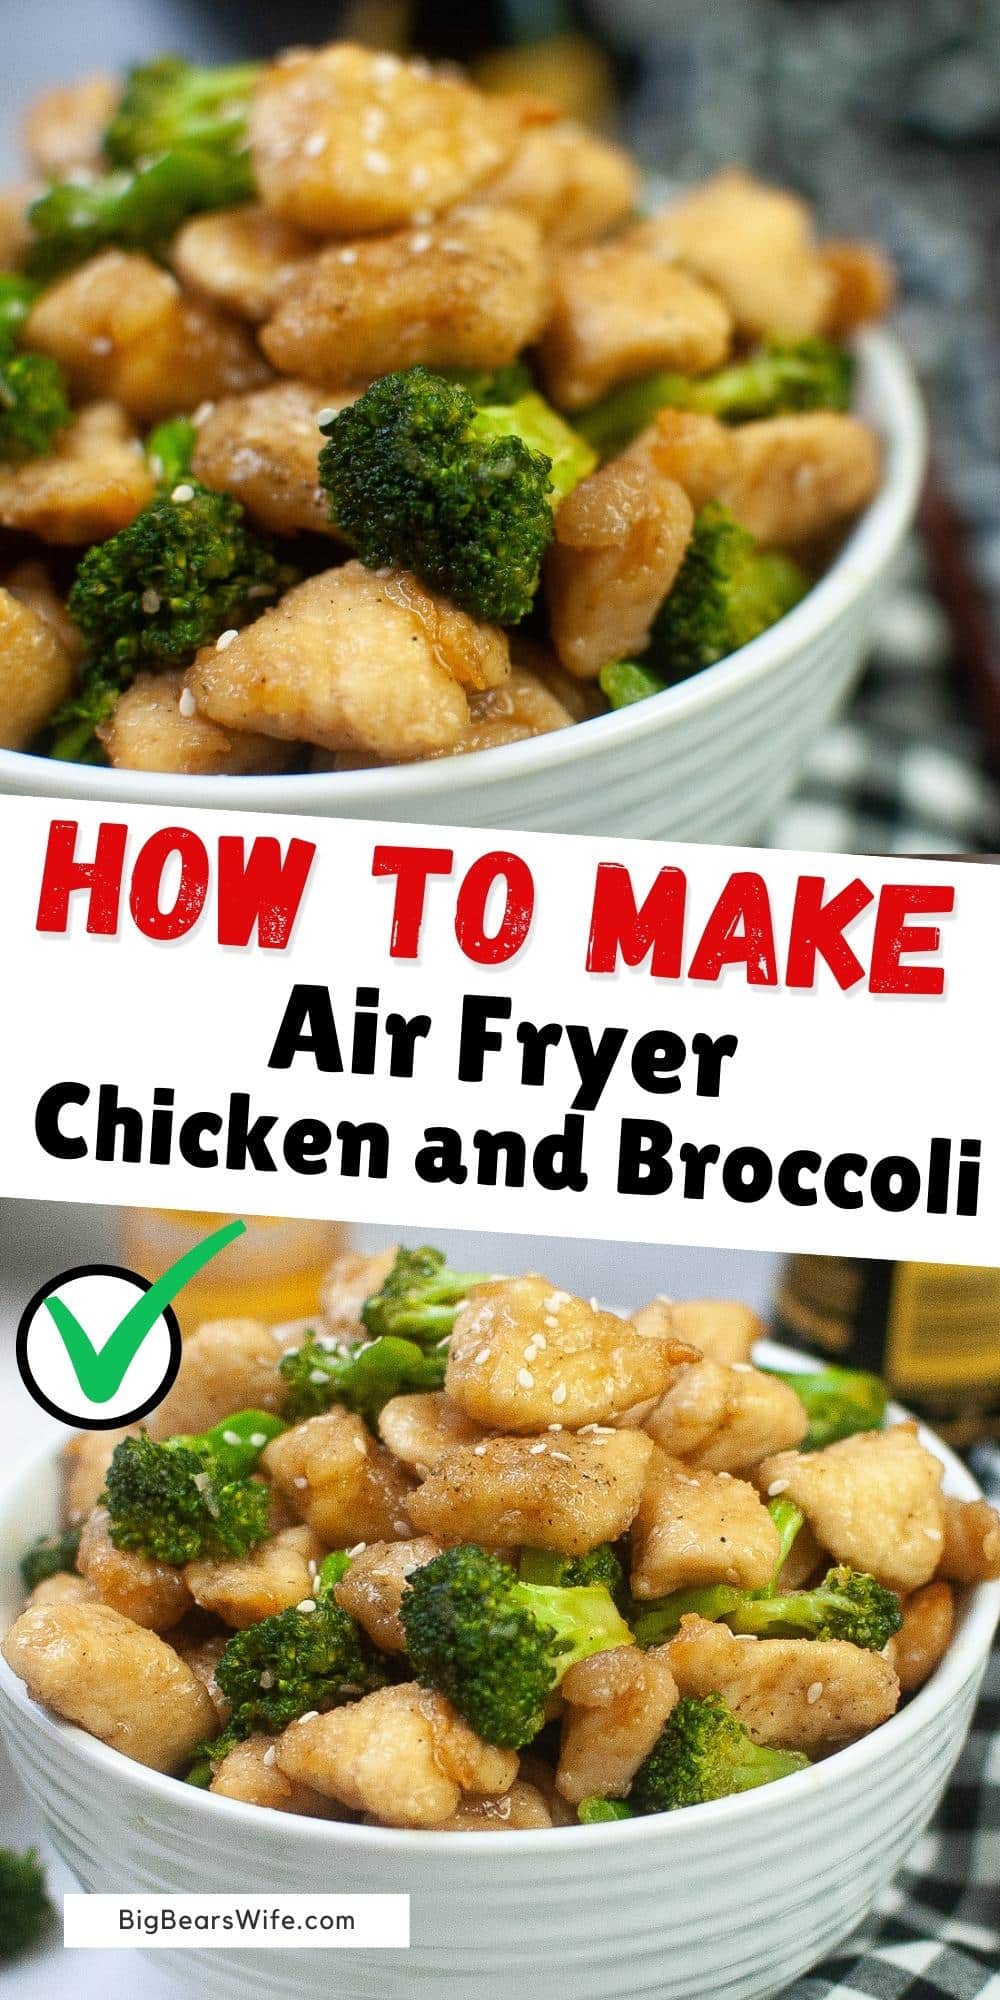 This fantastic Air Fryer Chicken and Broccoli is a take out inspired recipe that is great for any day of the week! Chicken is cooked in the air fryer and them mixed together with an easy sauce and fresh broccoli for the perfect "takeout" at home. Great on it's own or served over rice.

 via @bigbearswife